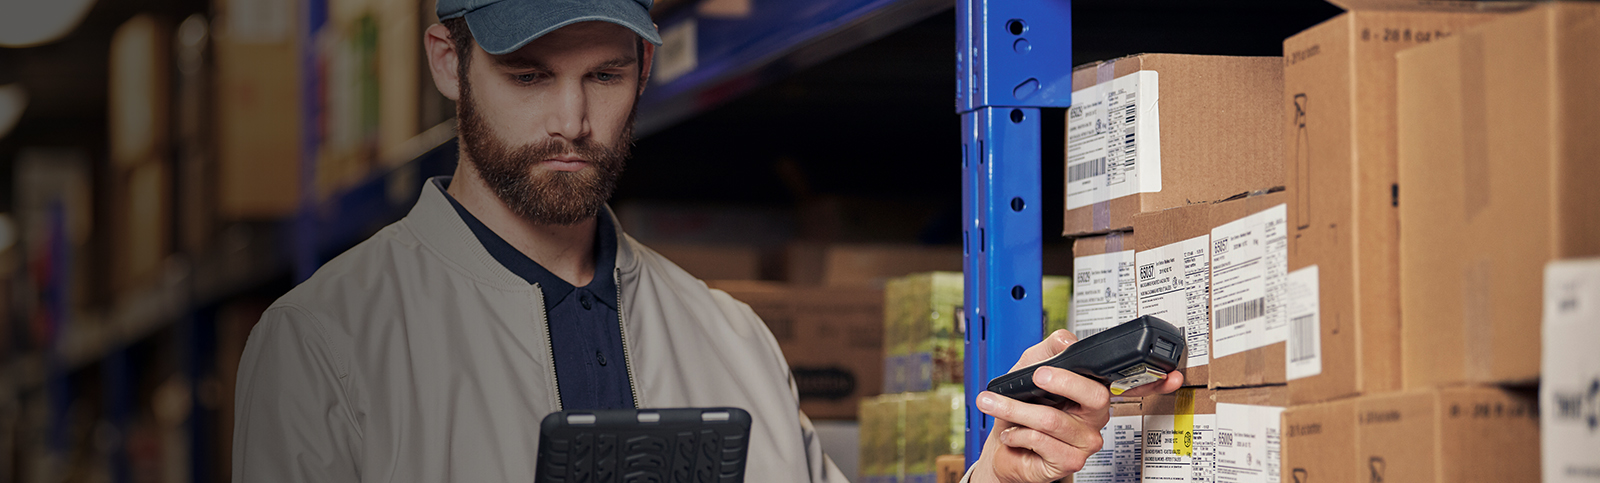 Man wearing blue hat in a warehouse scanning boxes with smart labels on his tablet